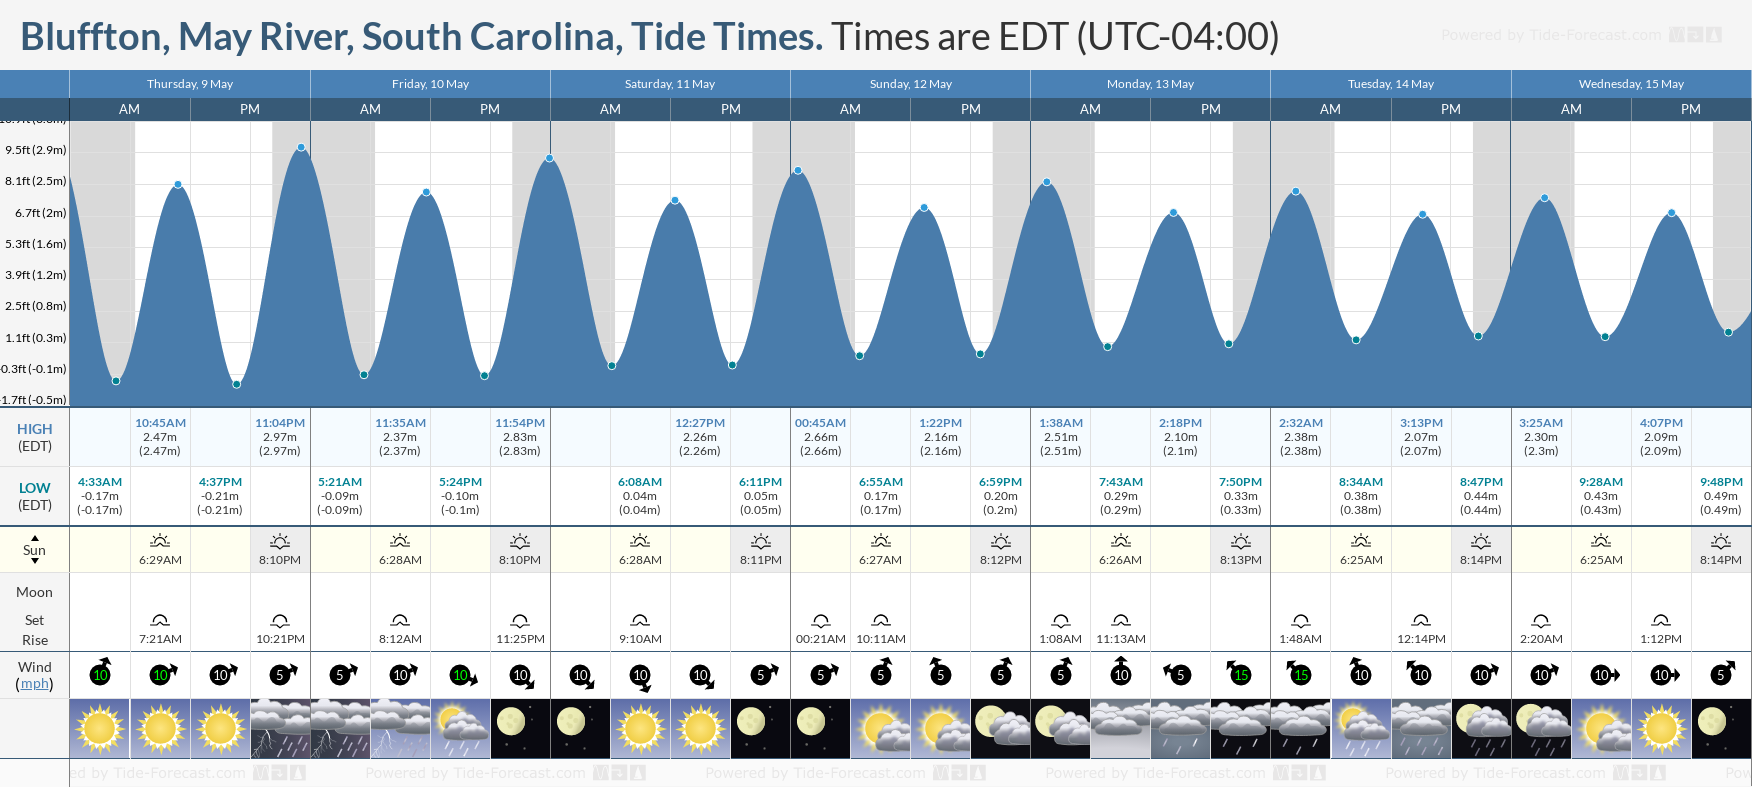 Bluffton, May River, South Carolina Tide Chart including high and low tide tide times for the next 7 days